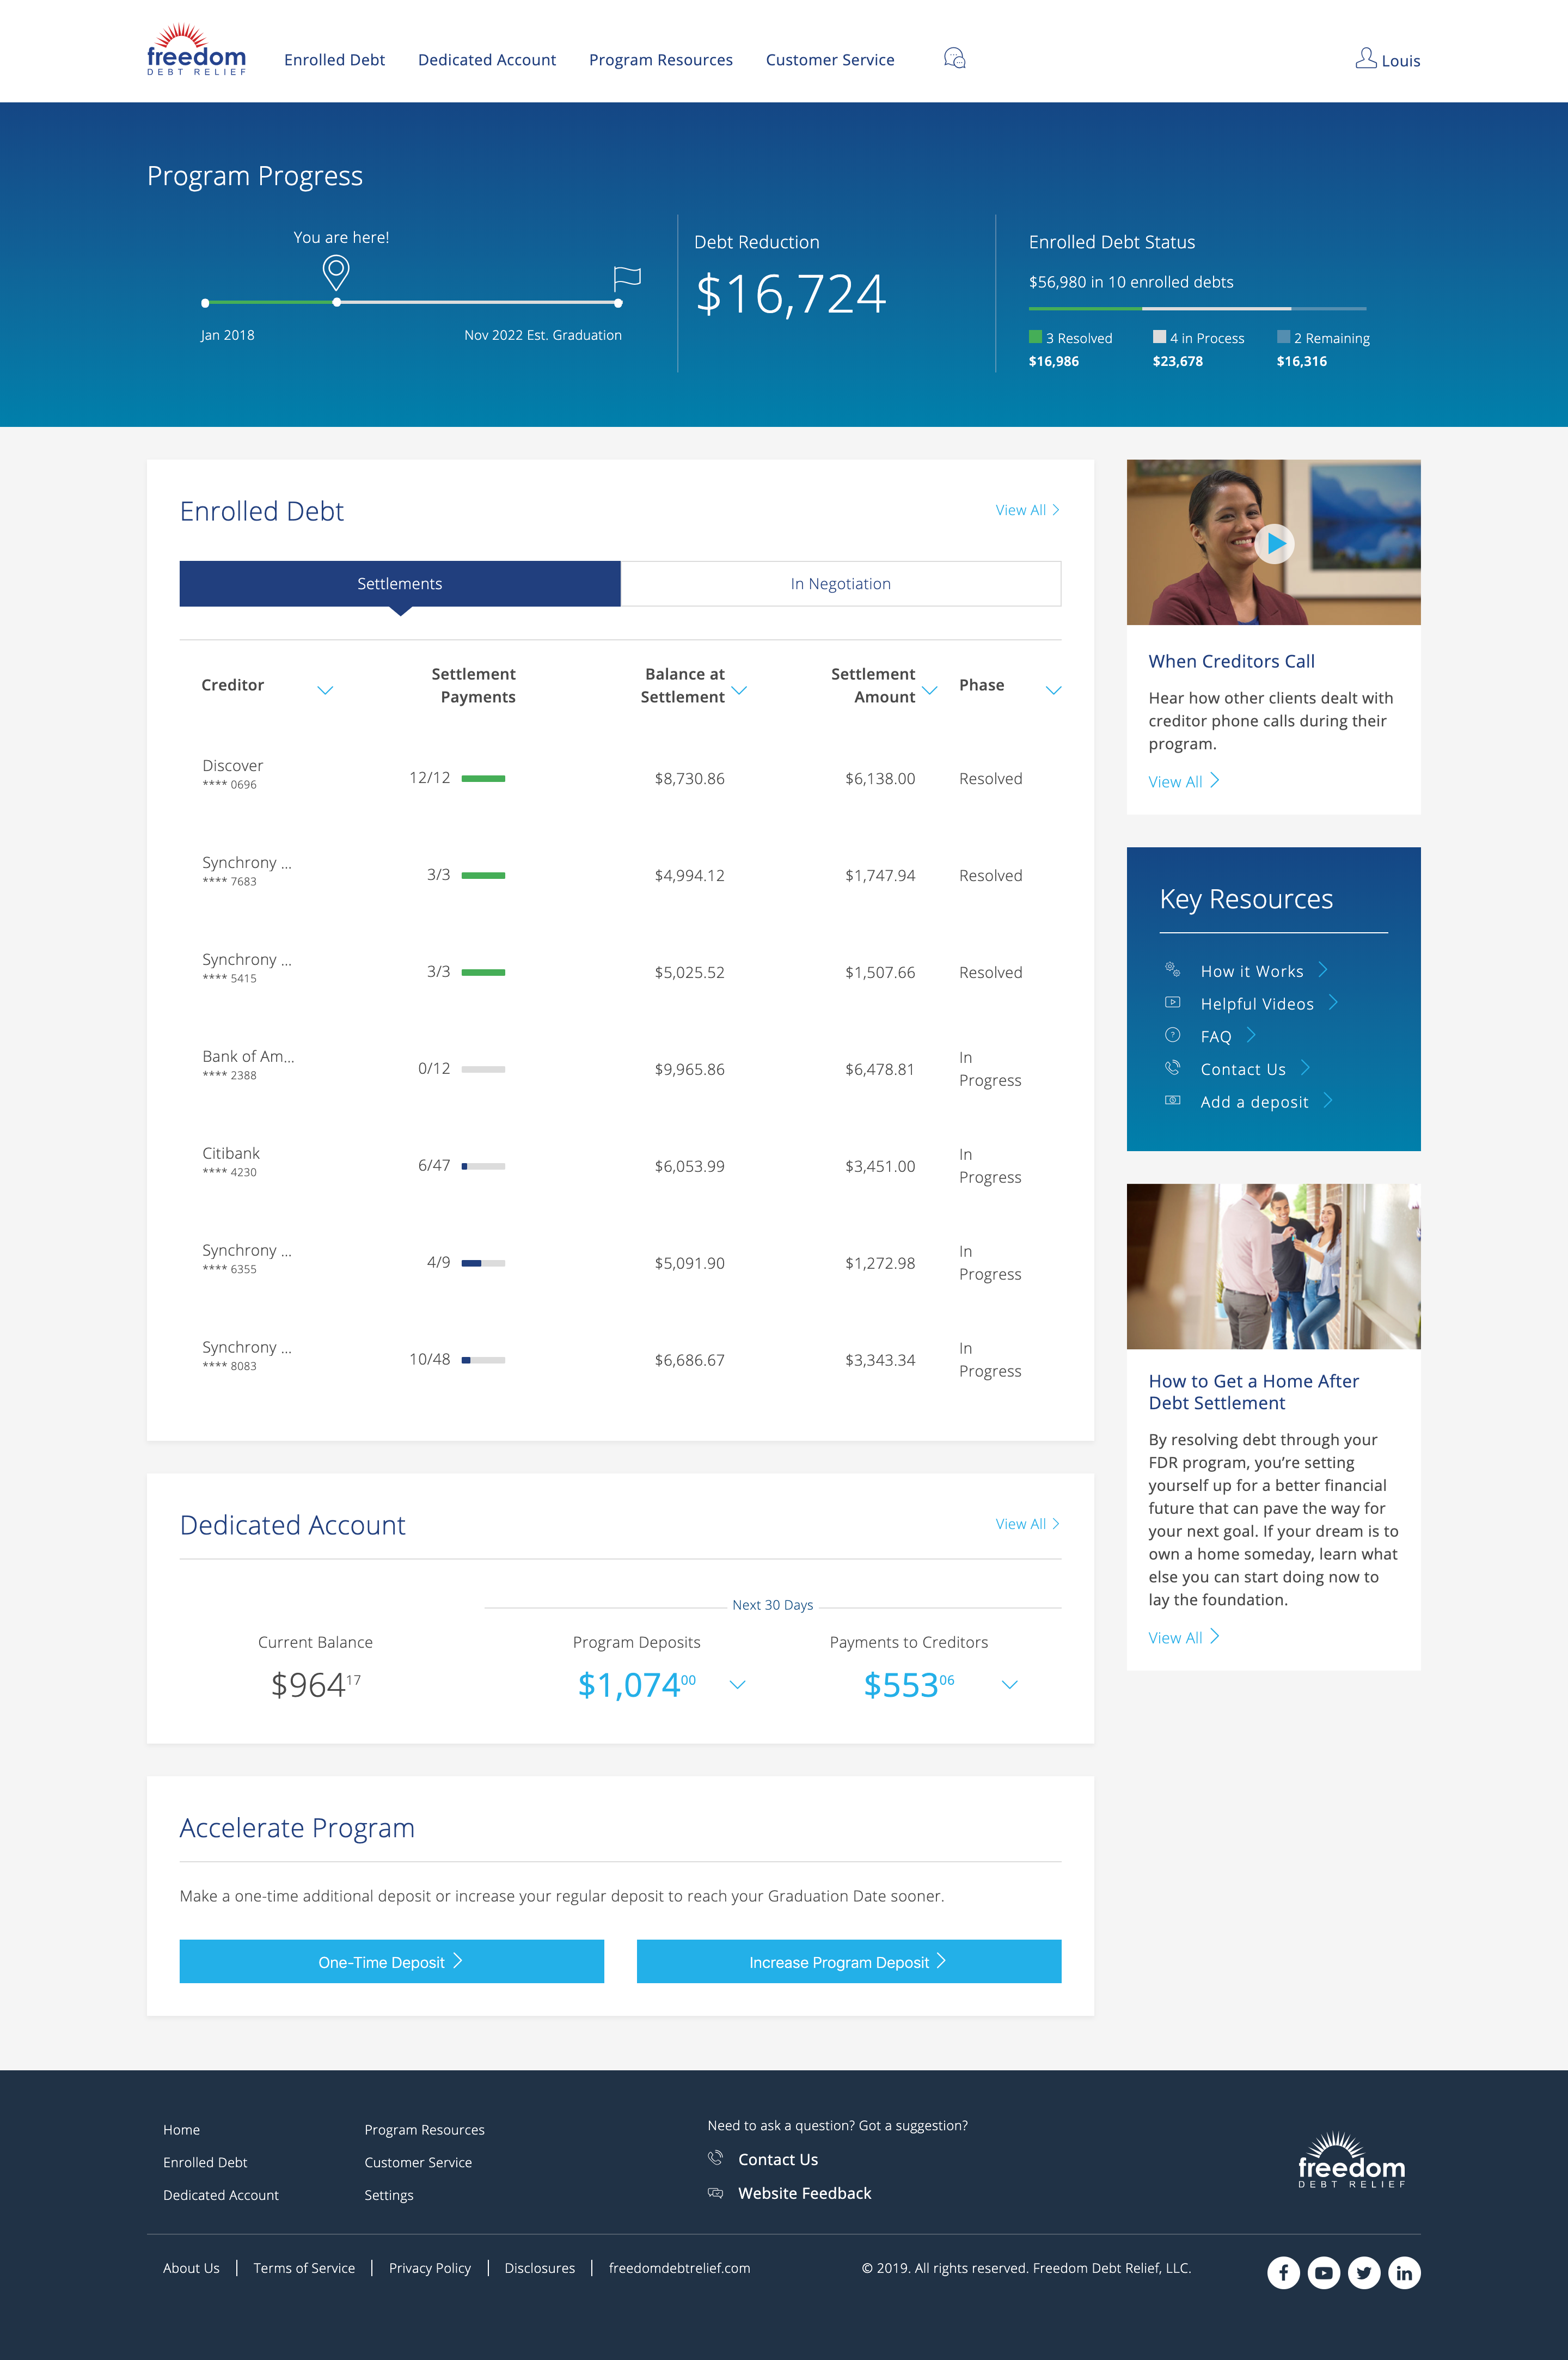 Freedom Debt Relief client dashboard - Home page